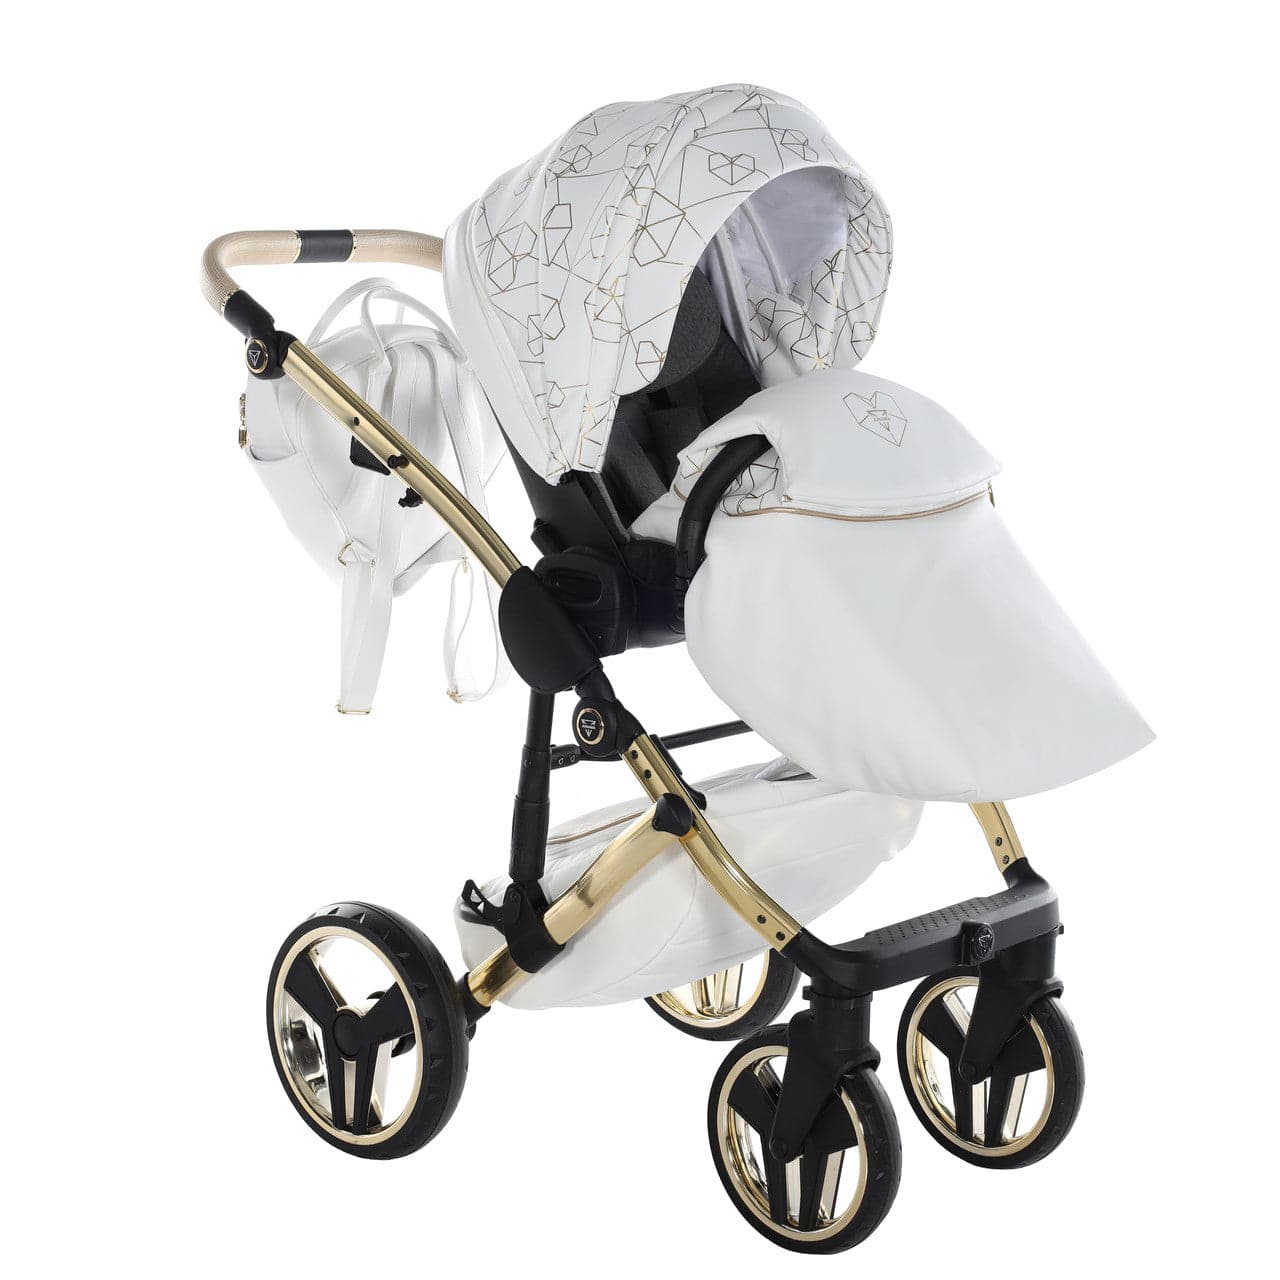 Junama Heart 3 In 1 Travel System - White Gold - For Your Little One